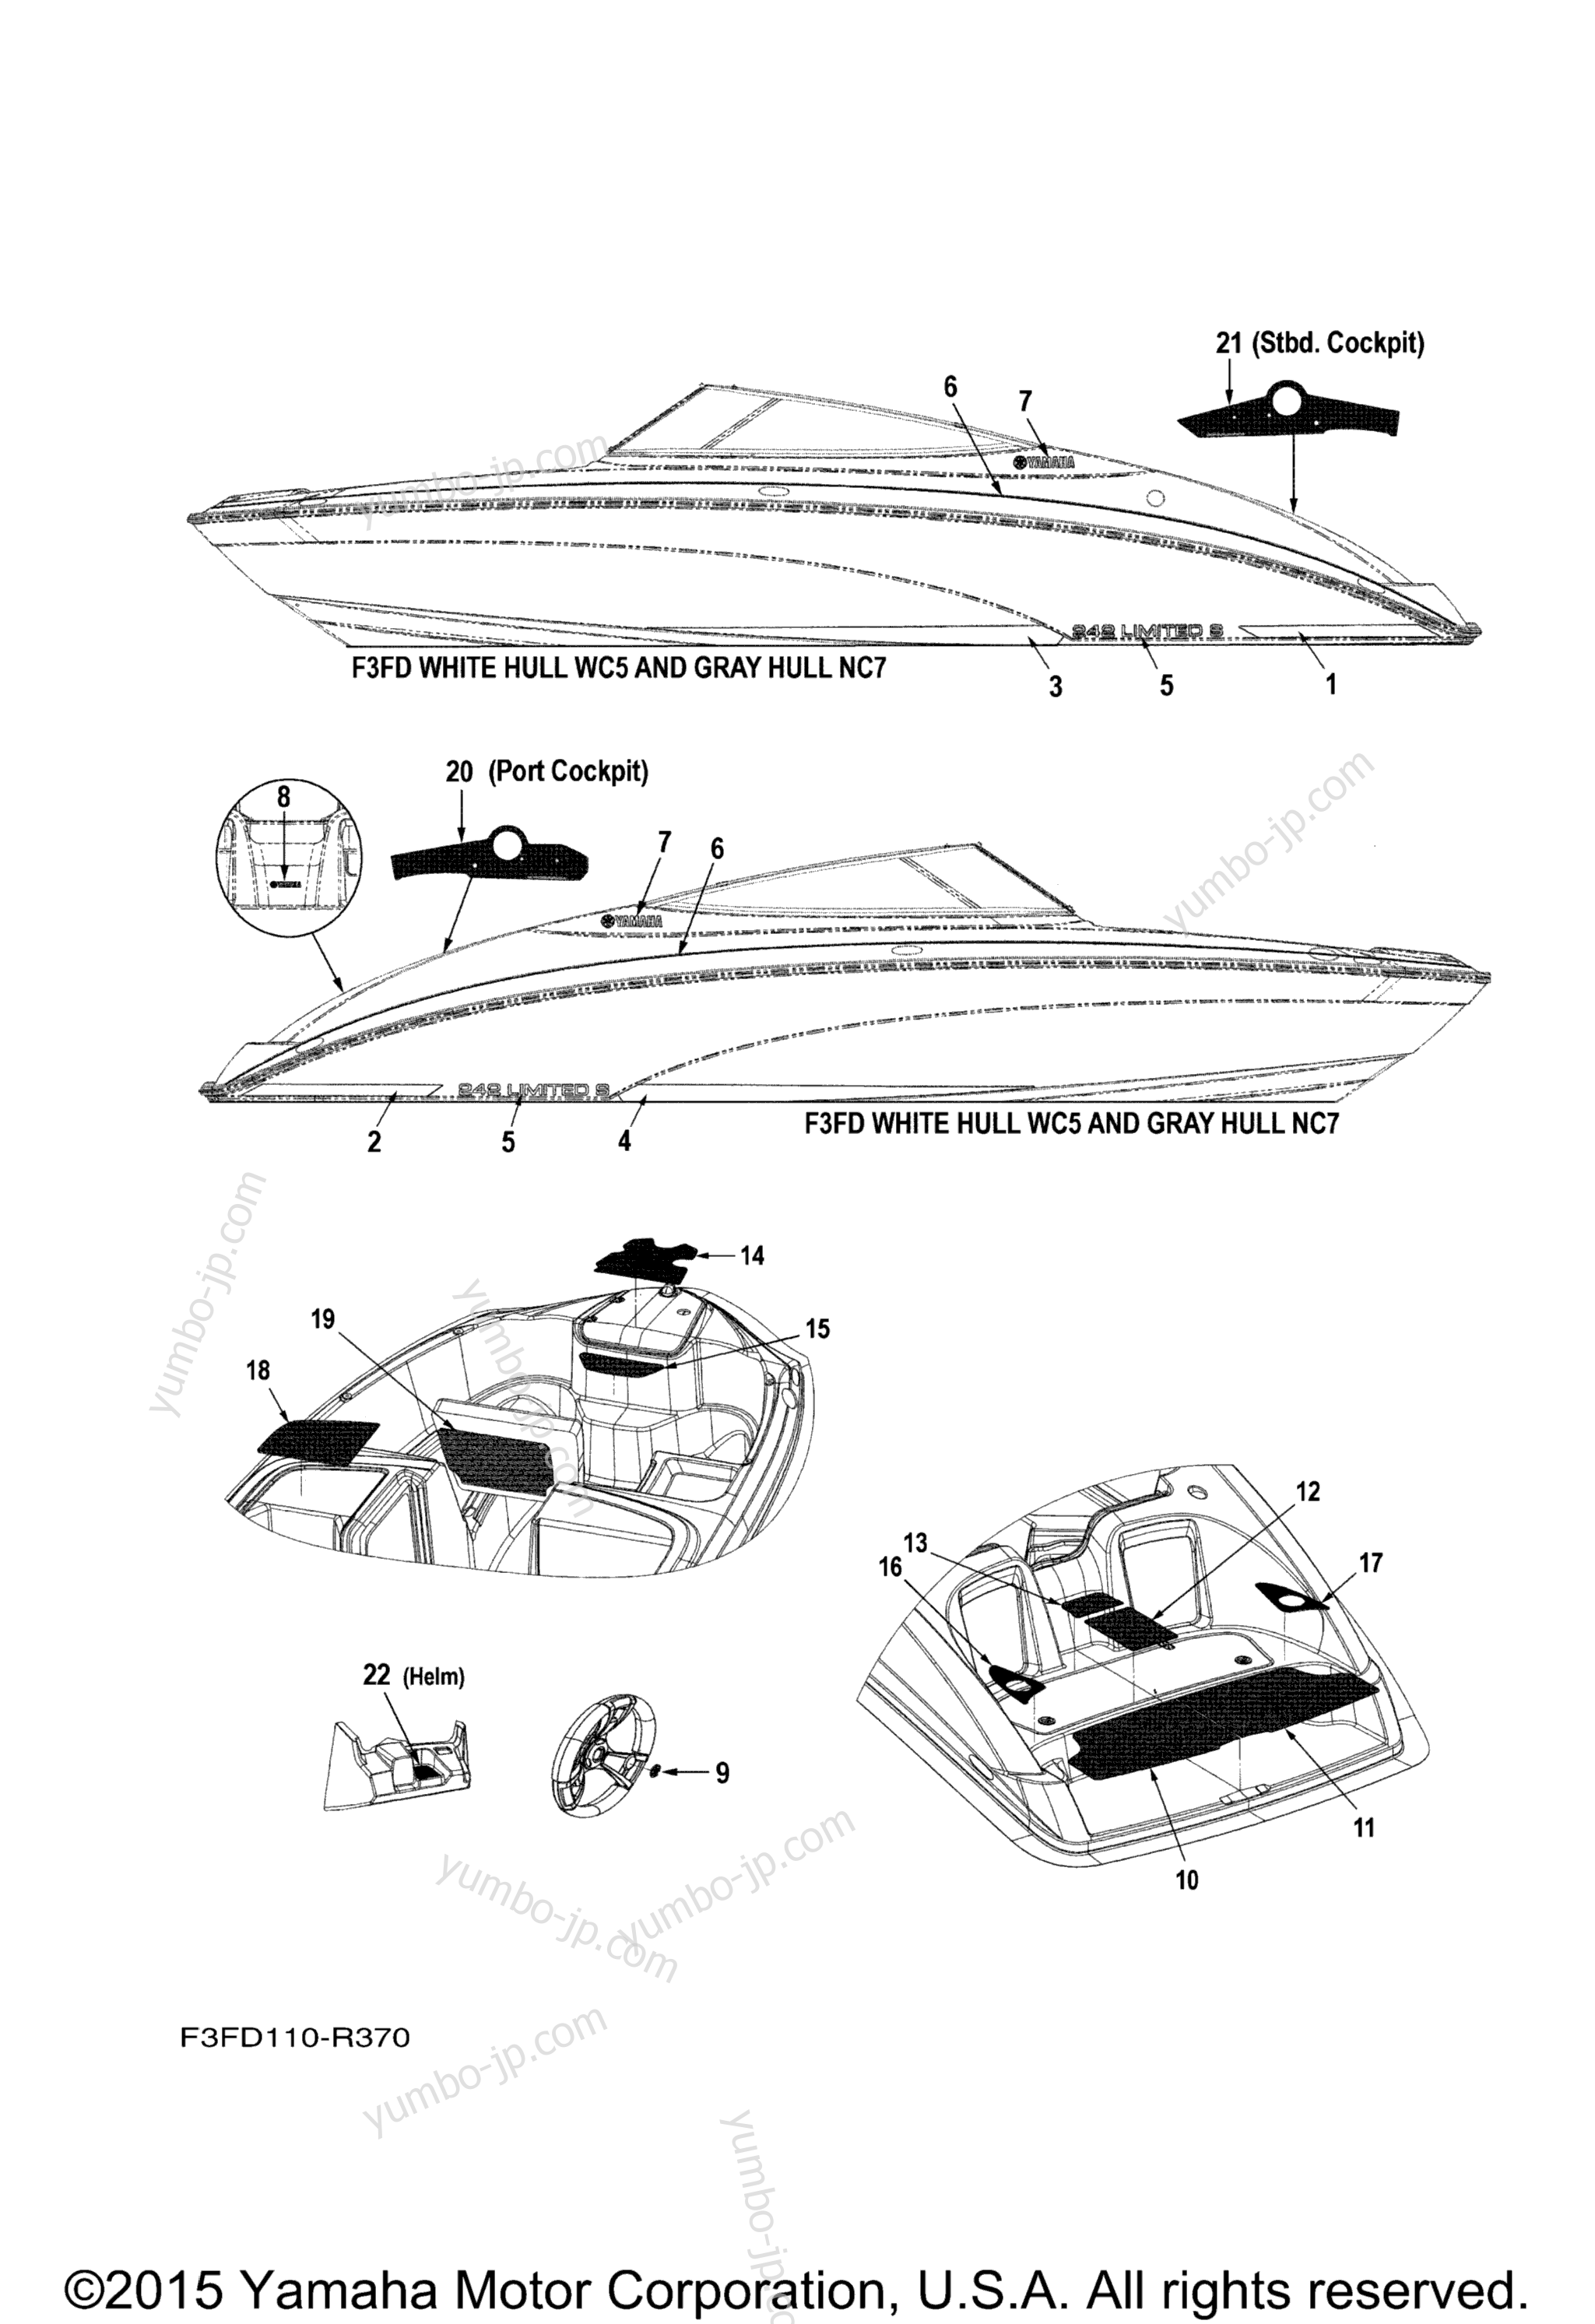 Graphics & Mats for boats YAMAHA 242 LIMITED S (SAT1800C-R) 2016 year